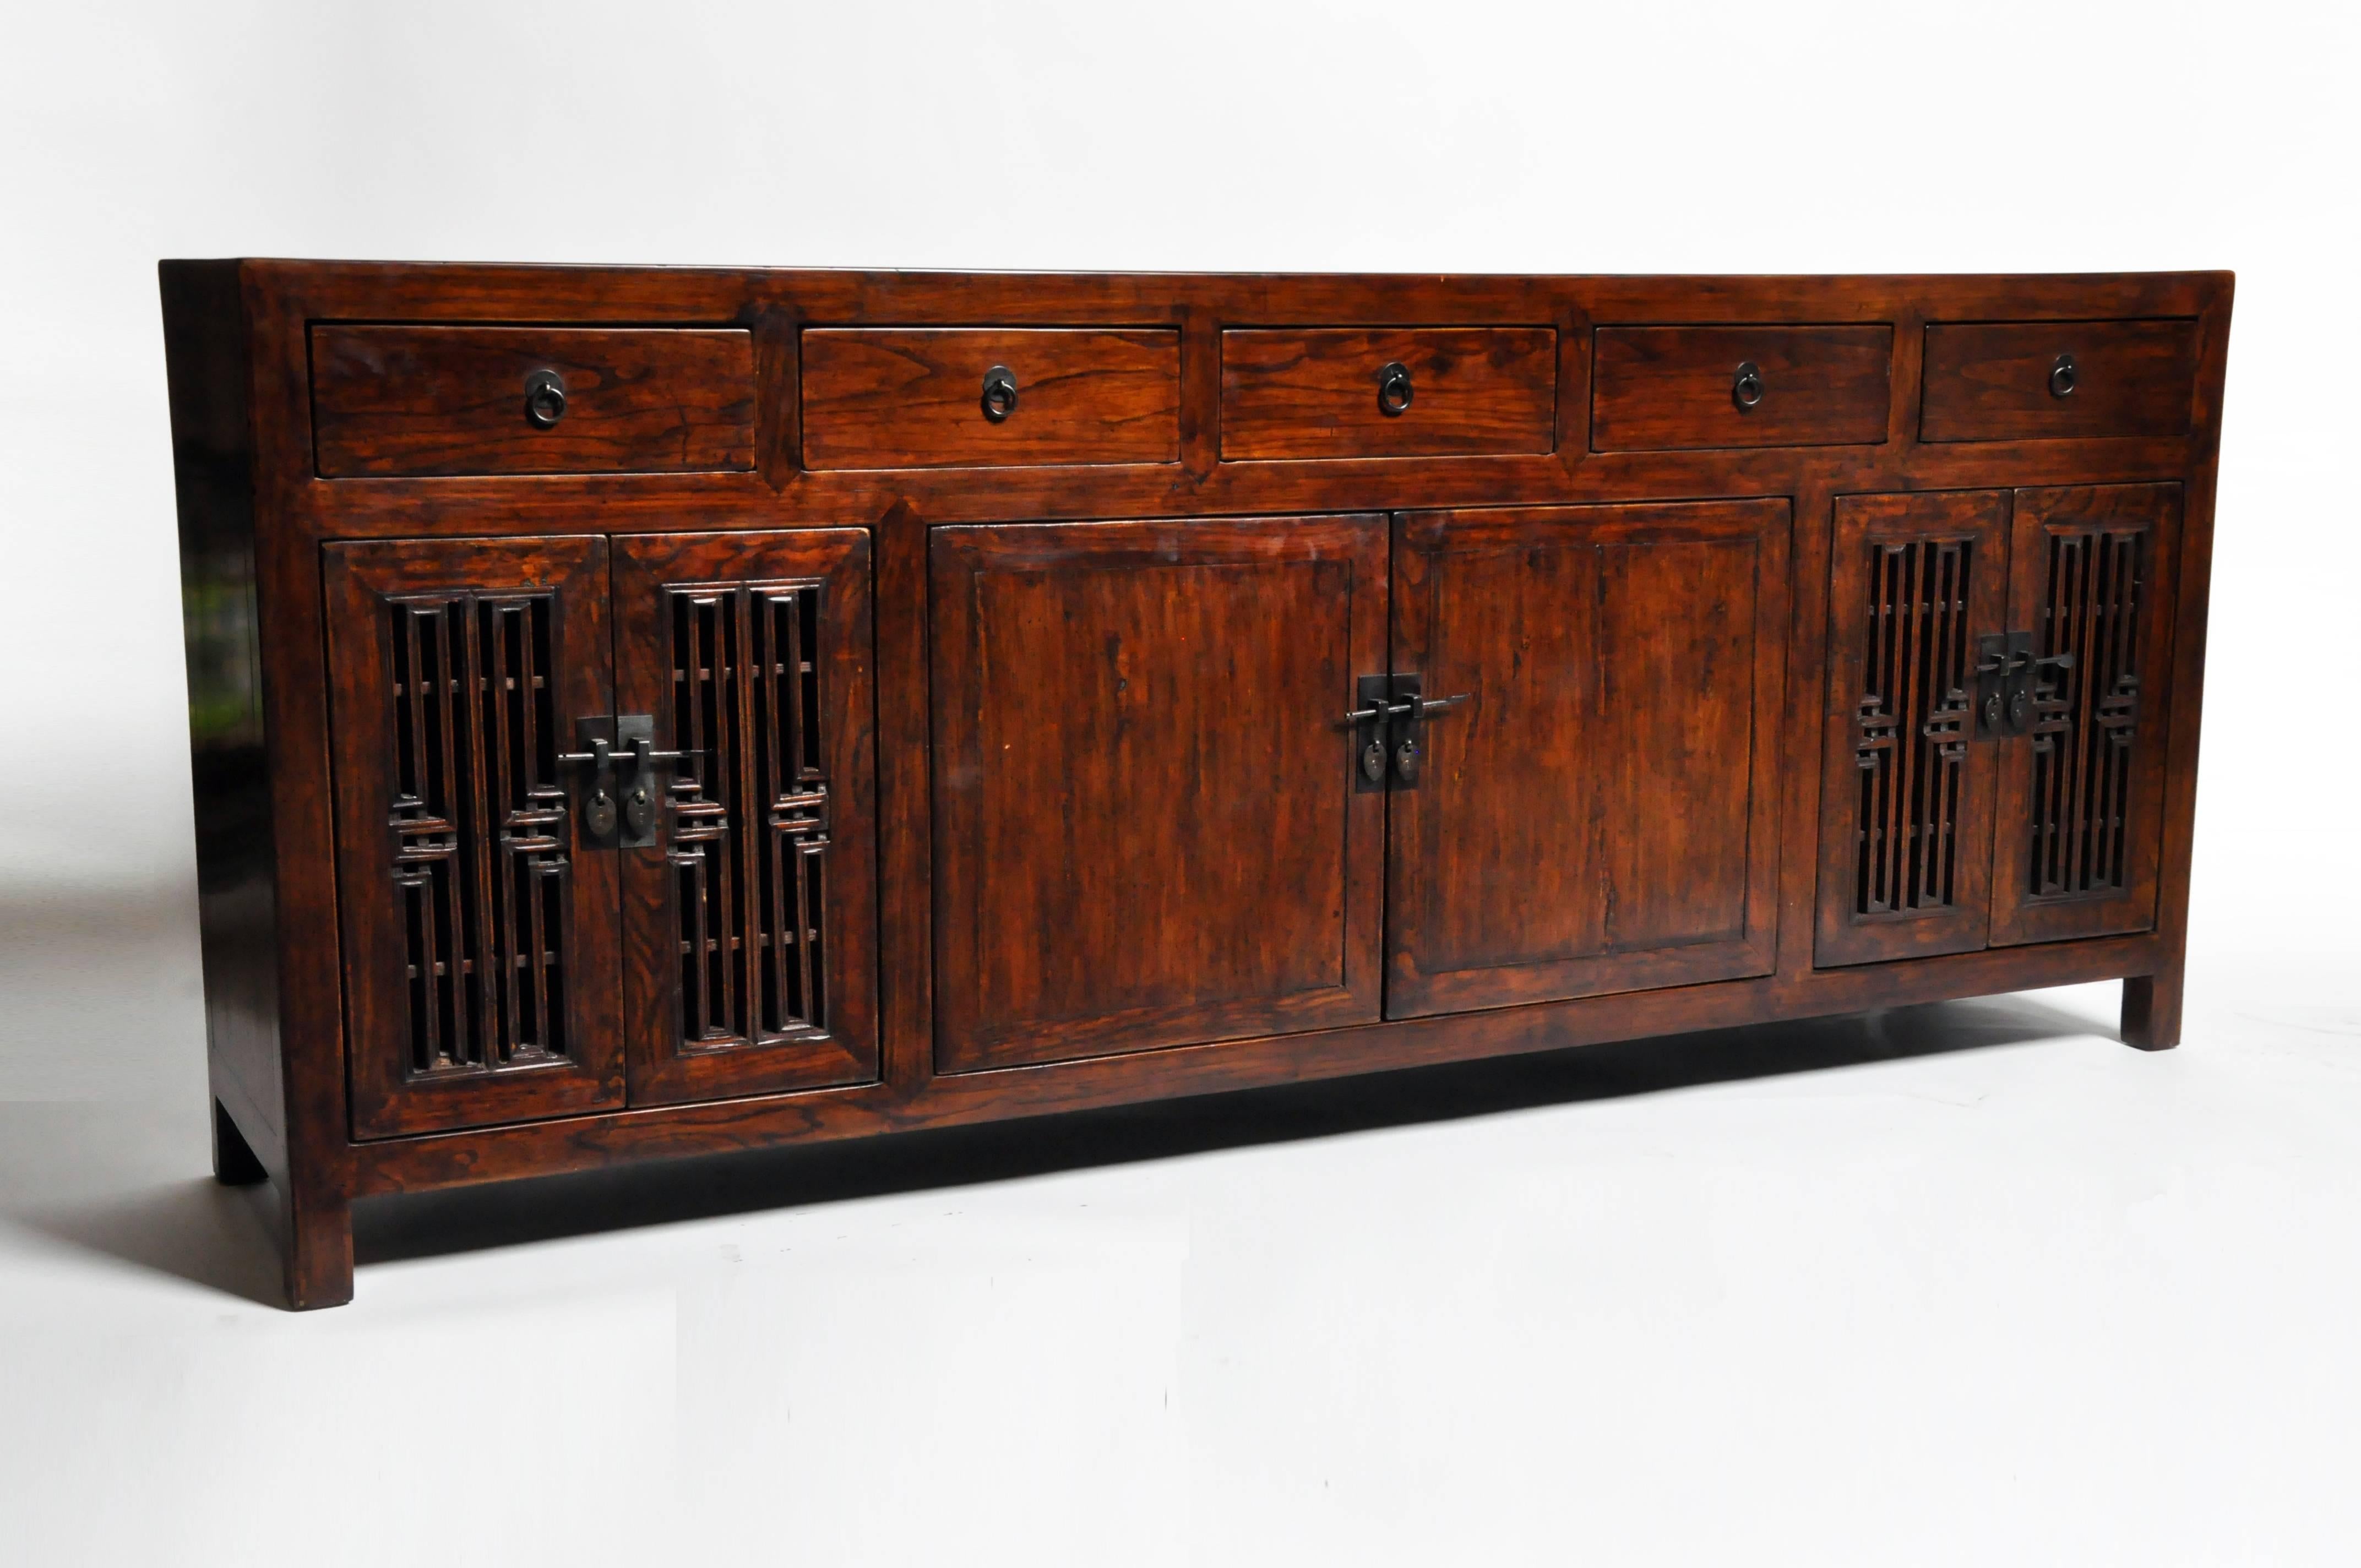 Contemporary Chinese Sideboard with Five Drawers and Three Shelves